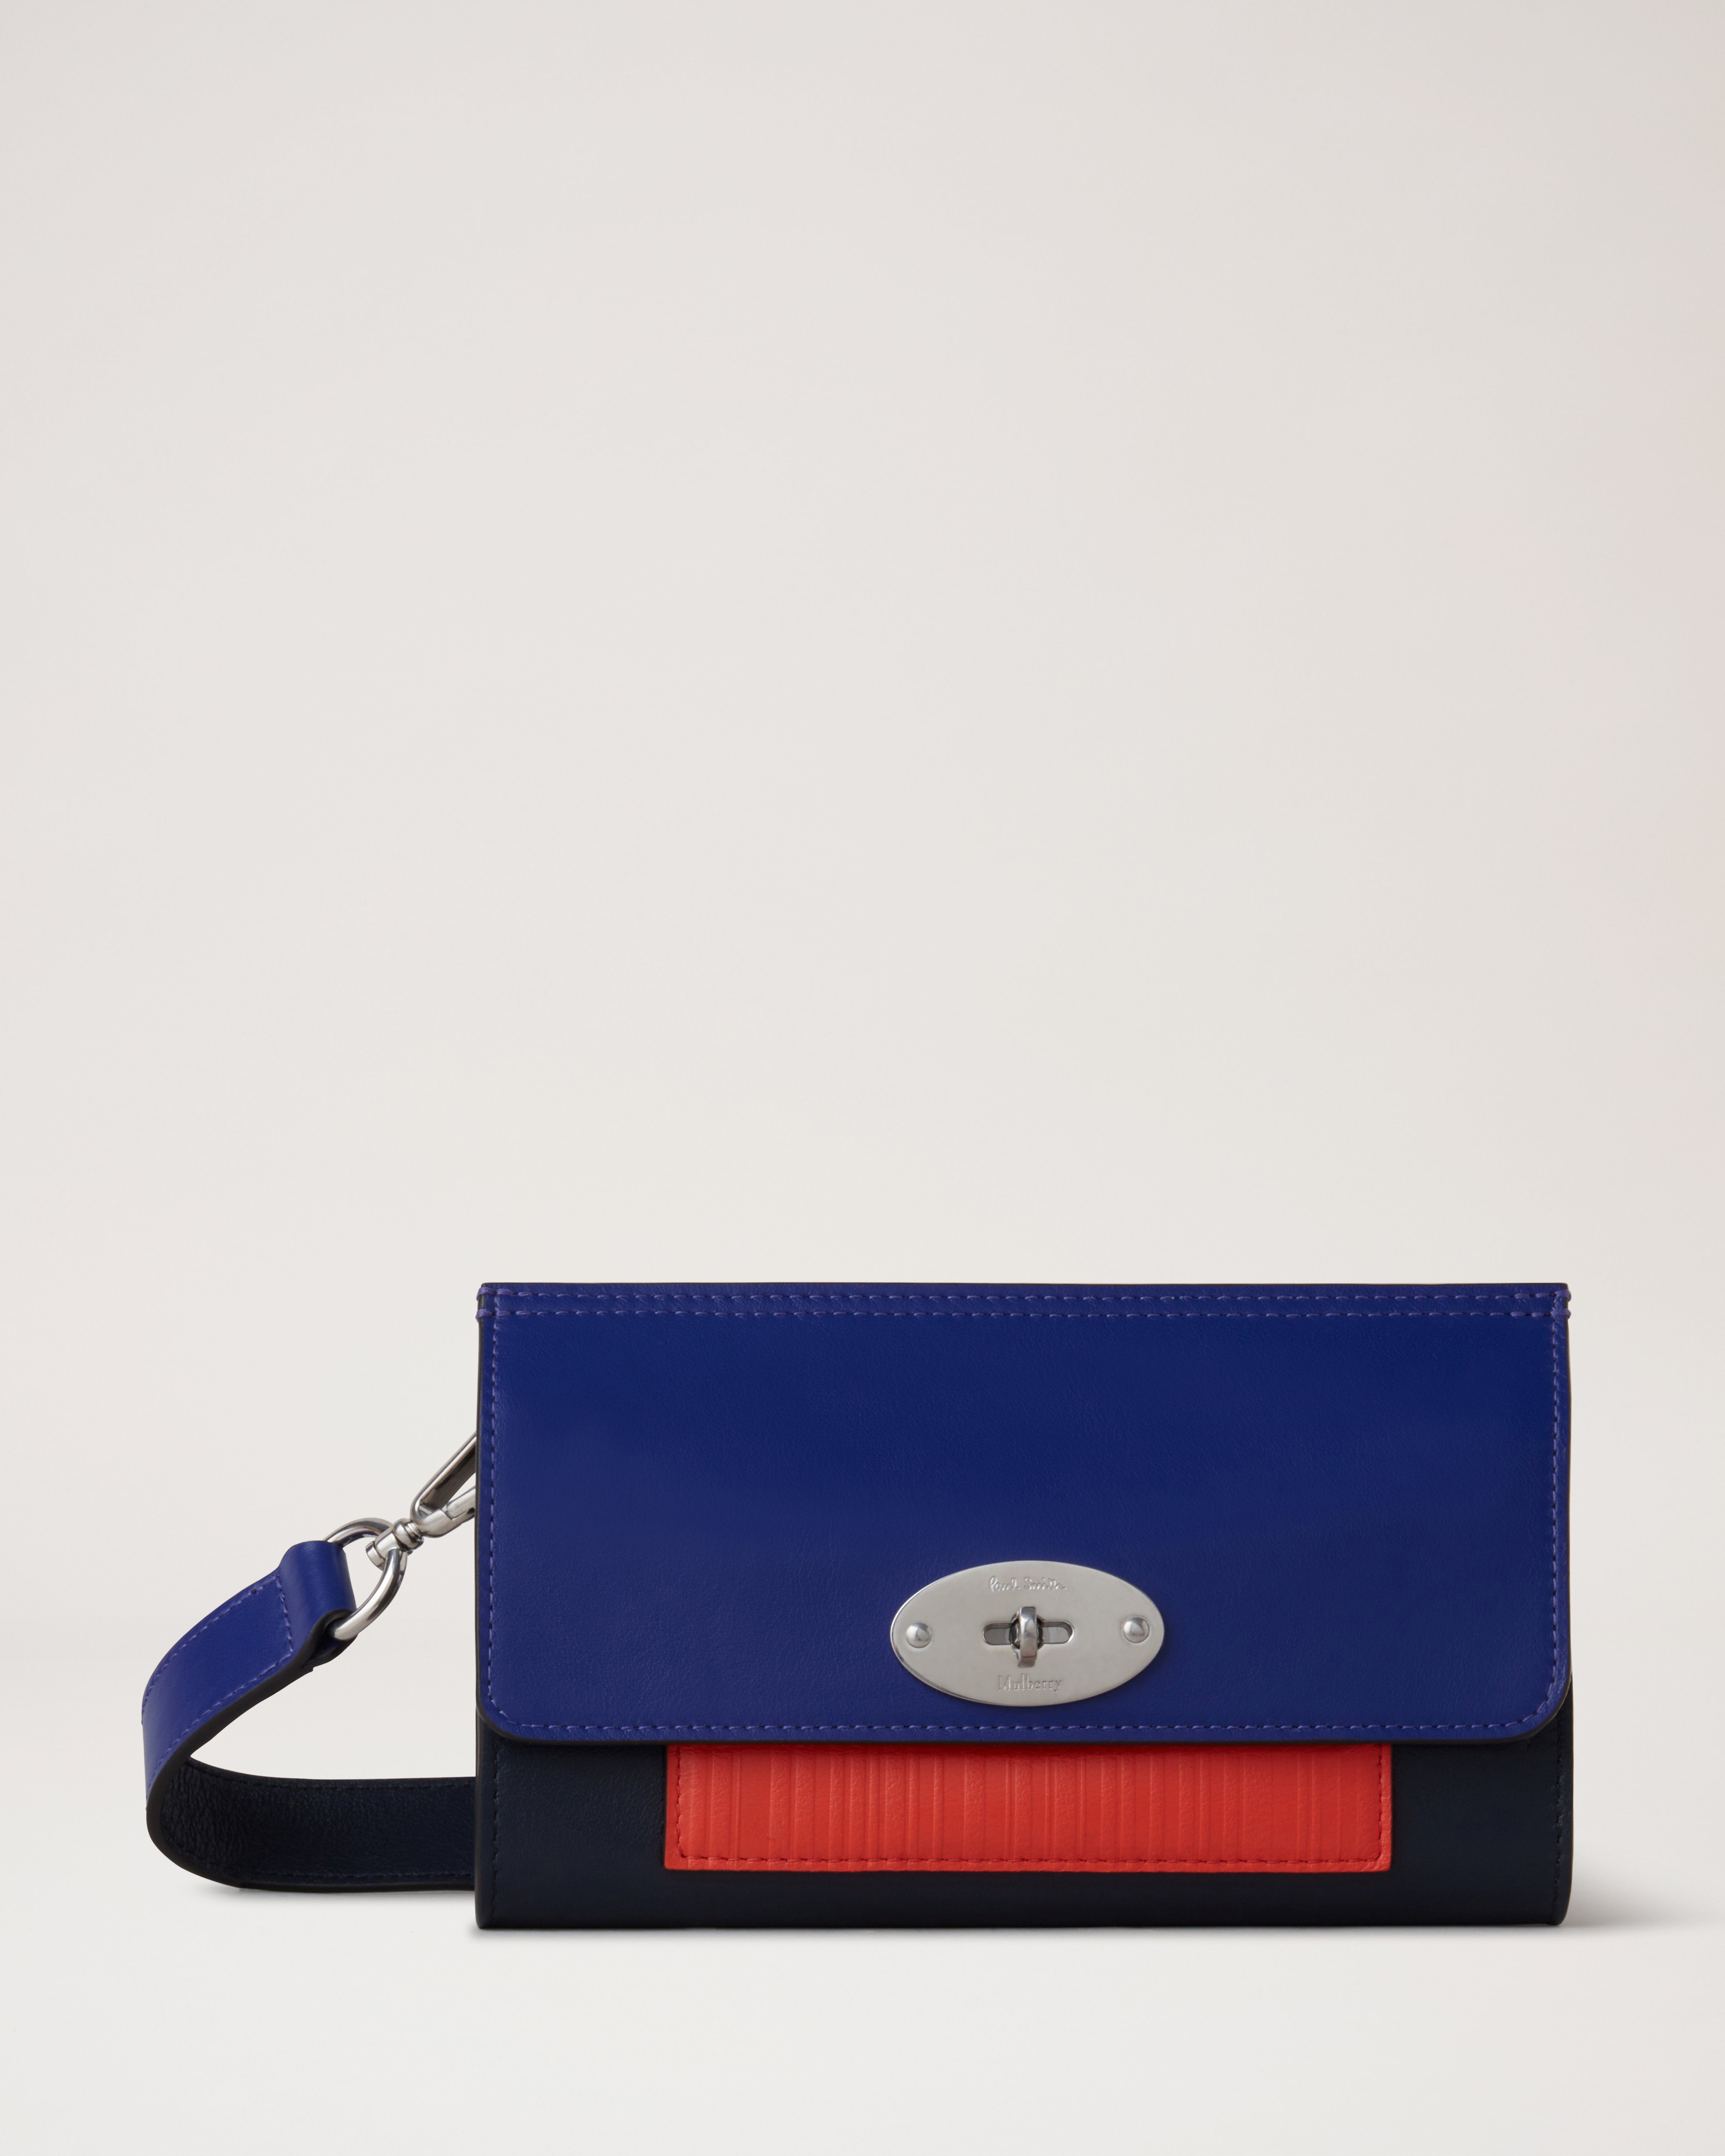 Paul Smith and Mulberry Present Collaborative Capsule